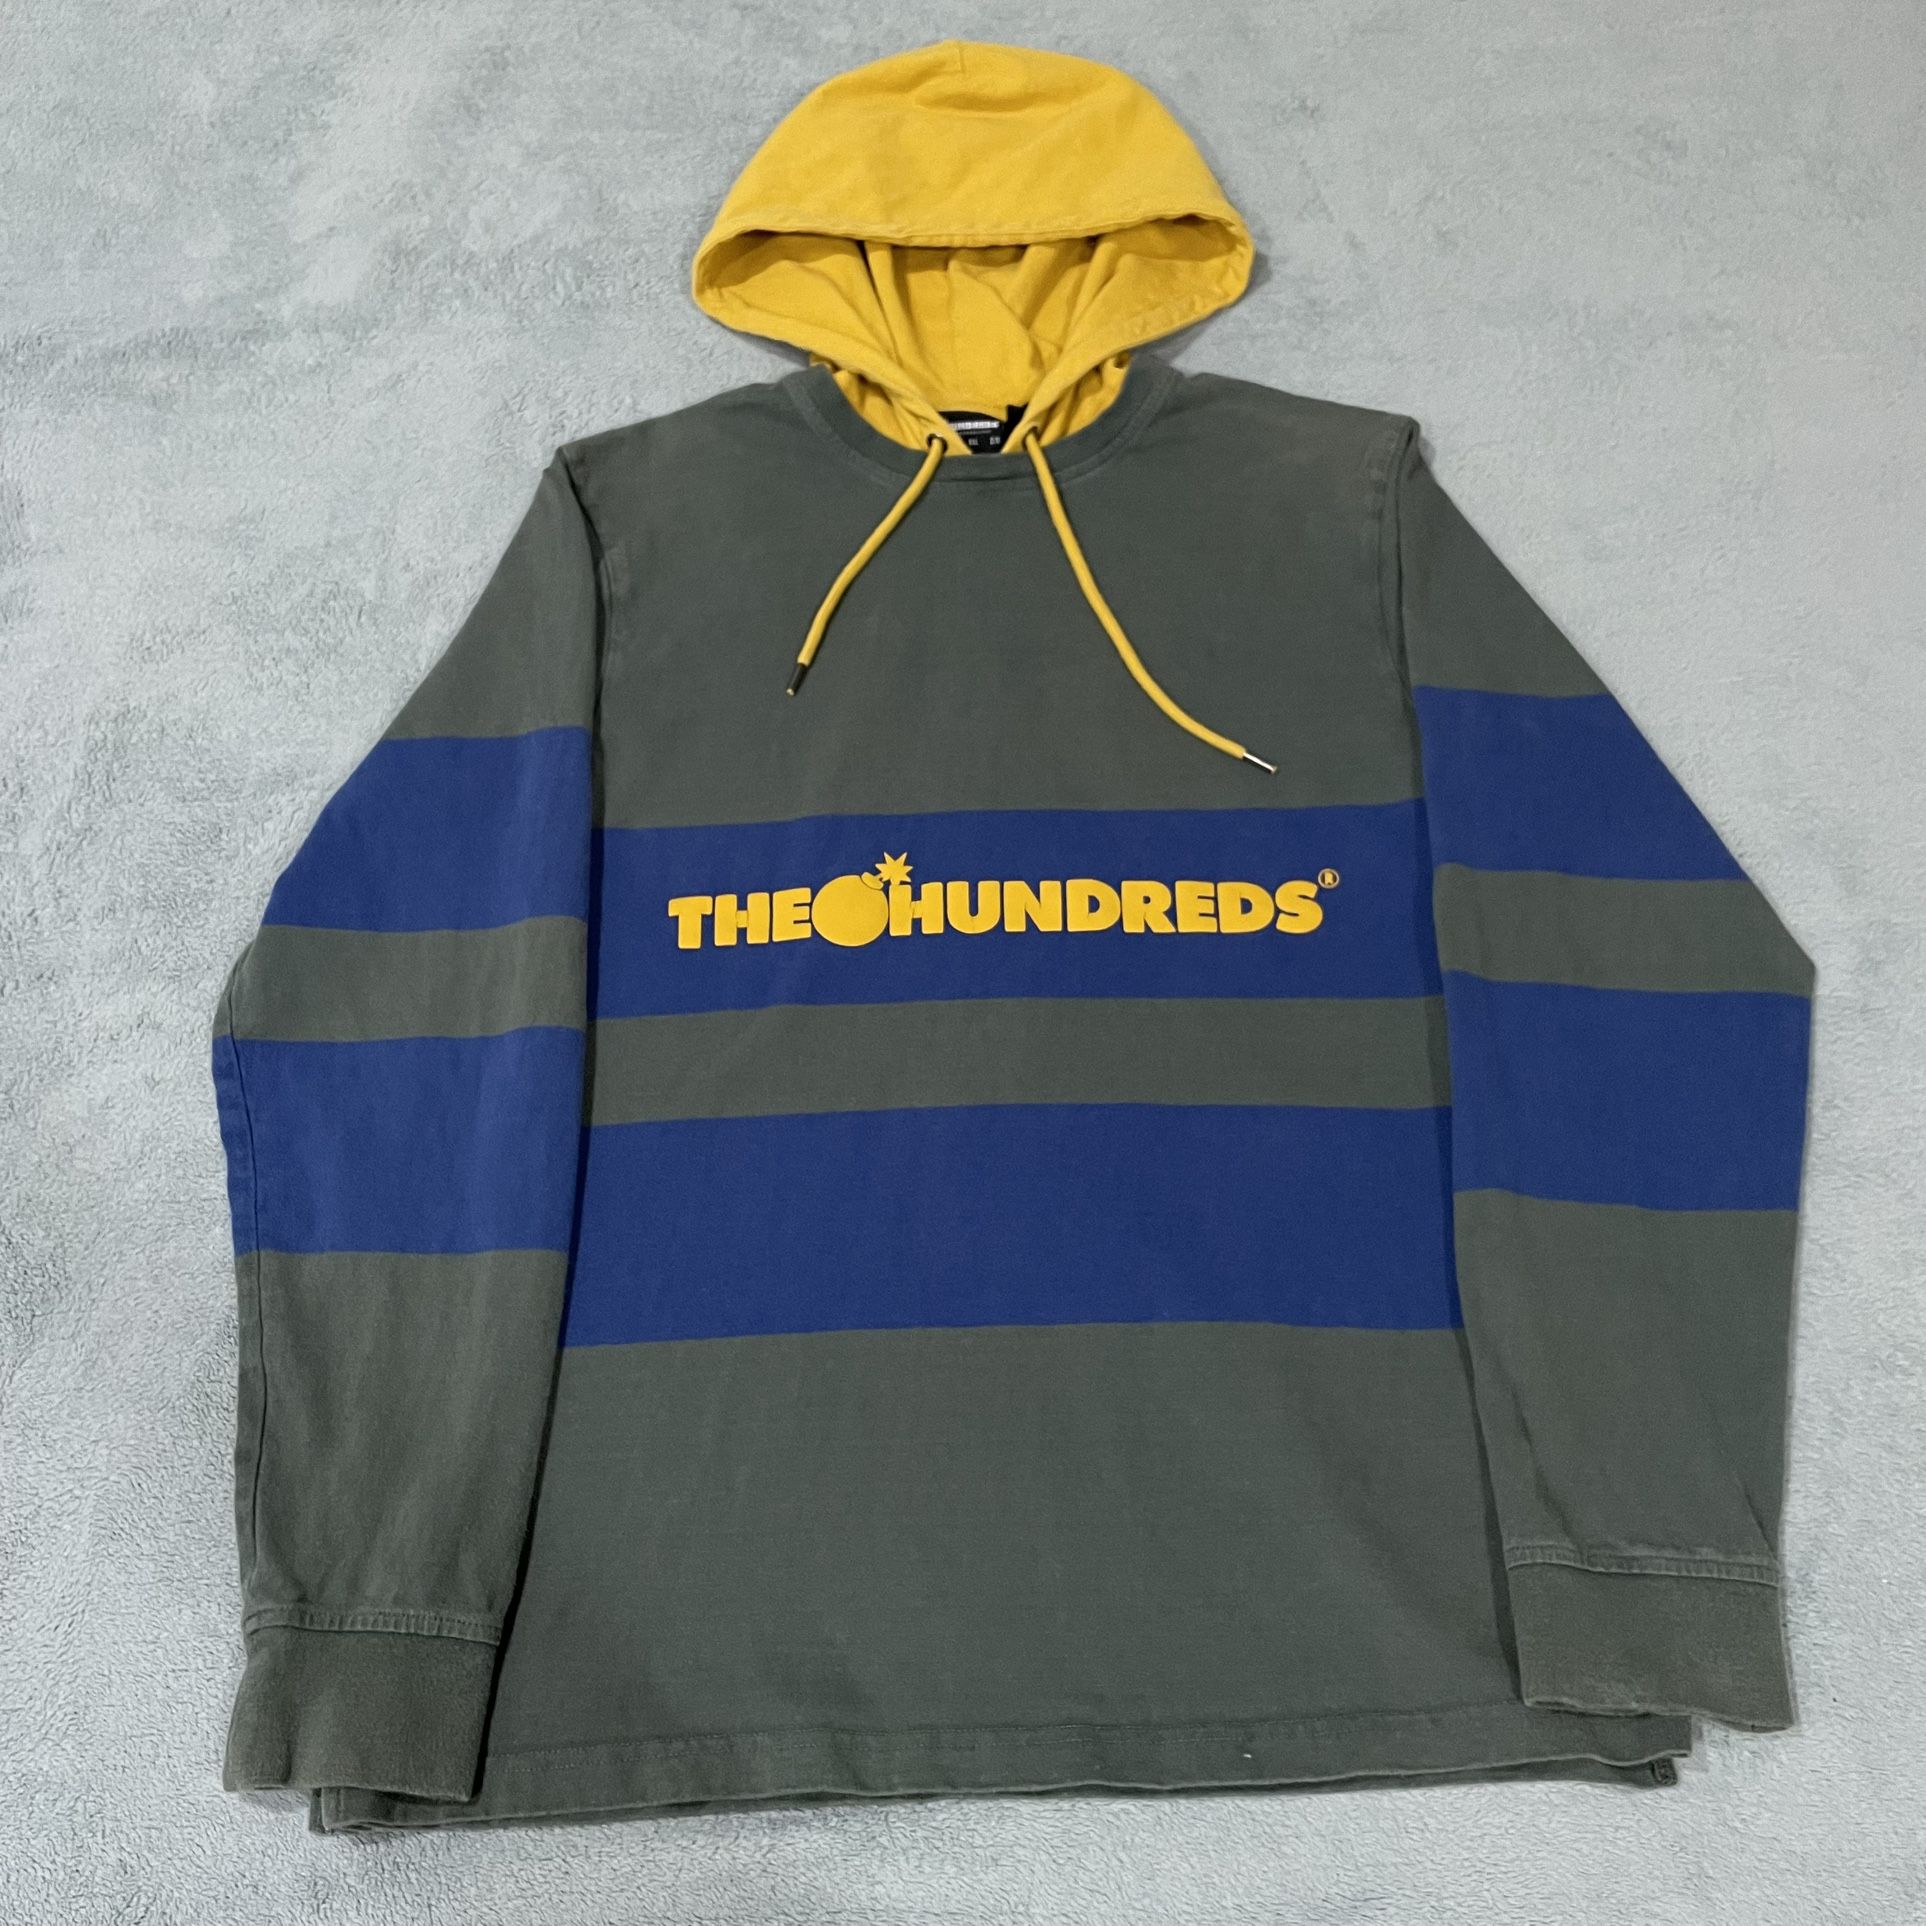 The Hundreds Long Sleeve Shirt Hoodie Size Large Colorblock Green Blue Yellow